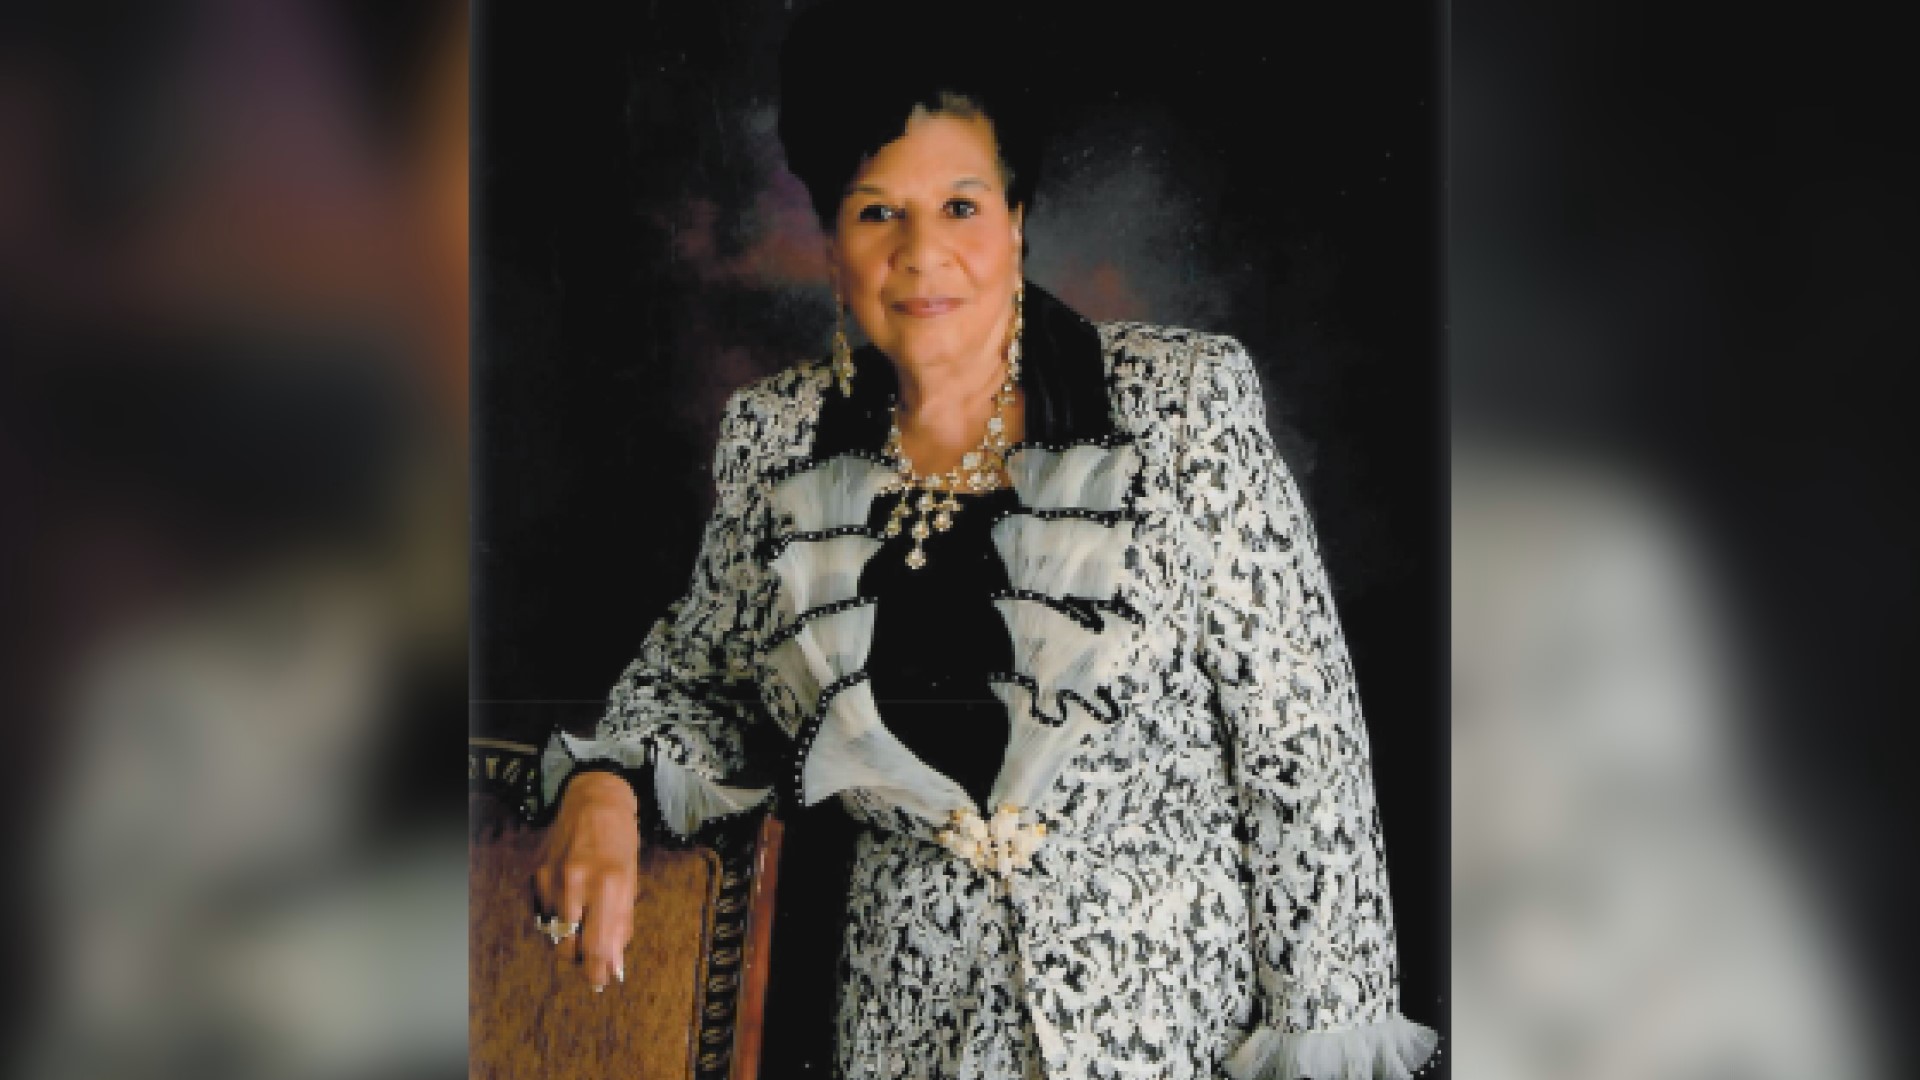 Long-time activist, religious leader Delores L. Cole has been described as a 'pillar of the community.'